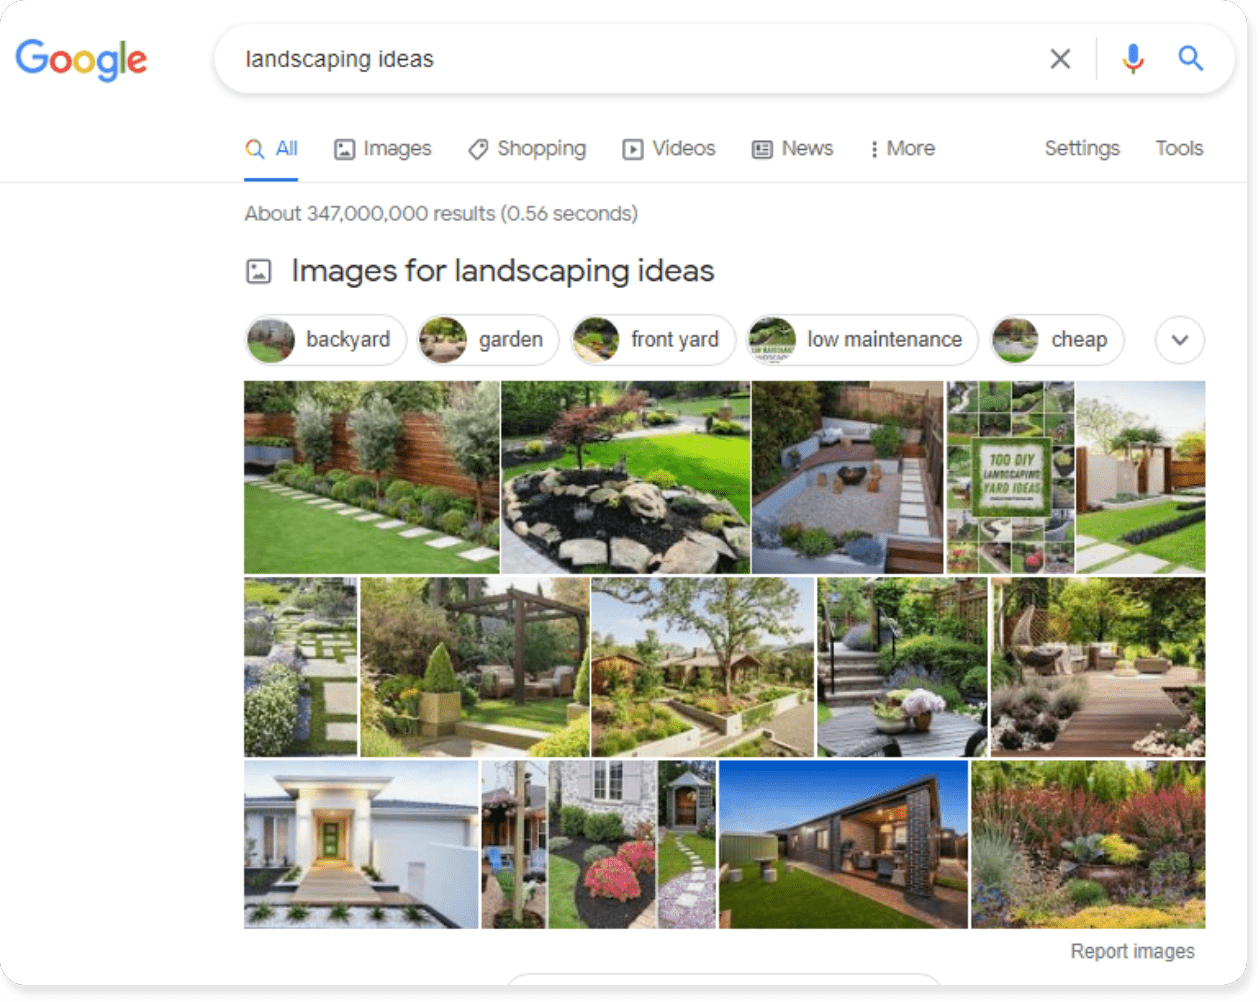 landscaping ideas google image search example